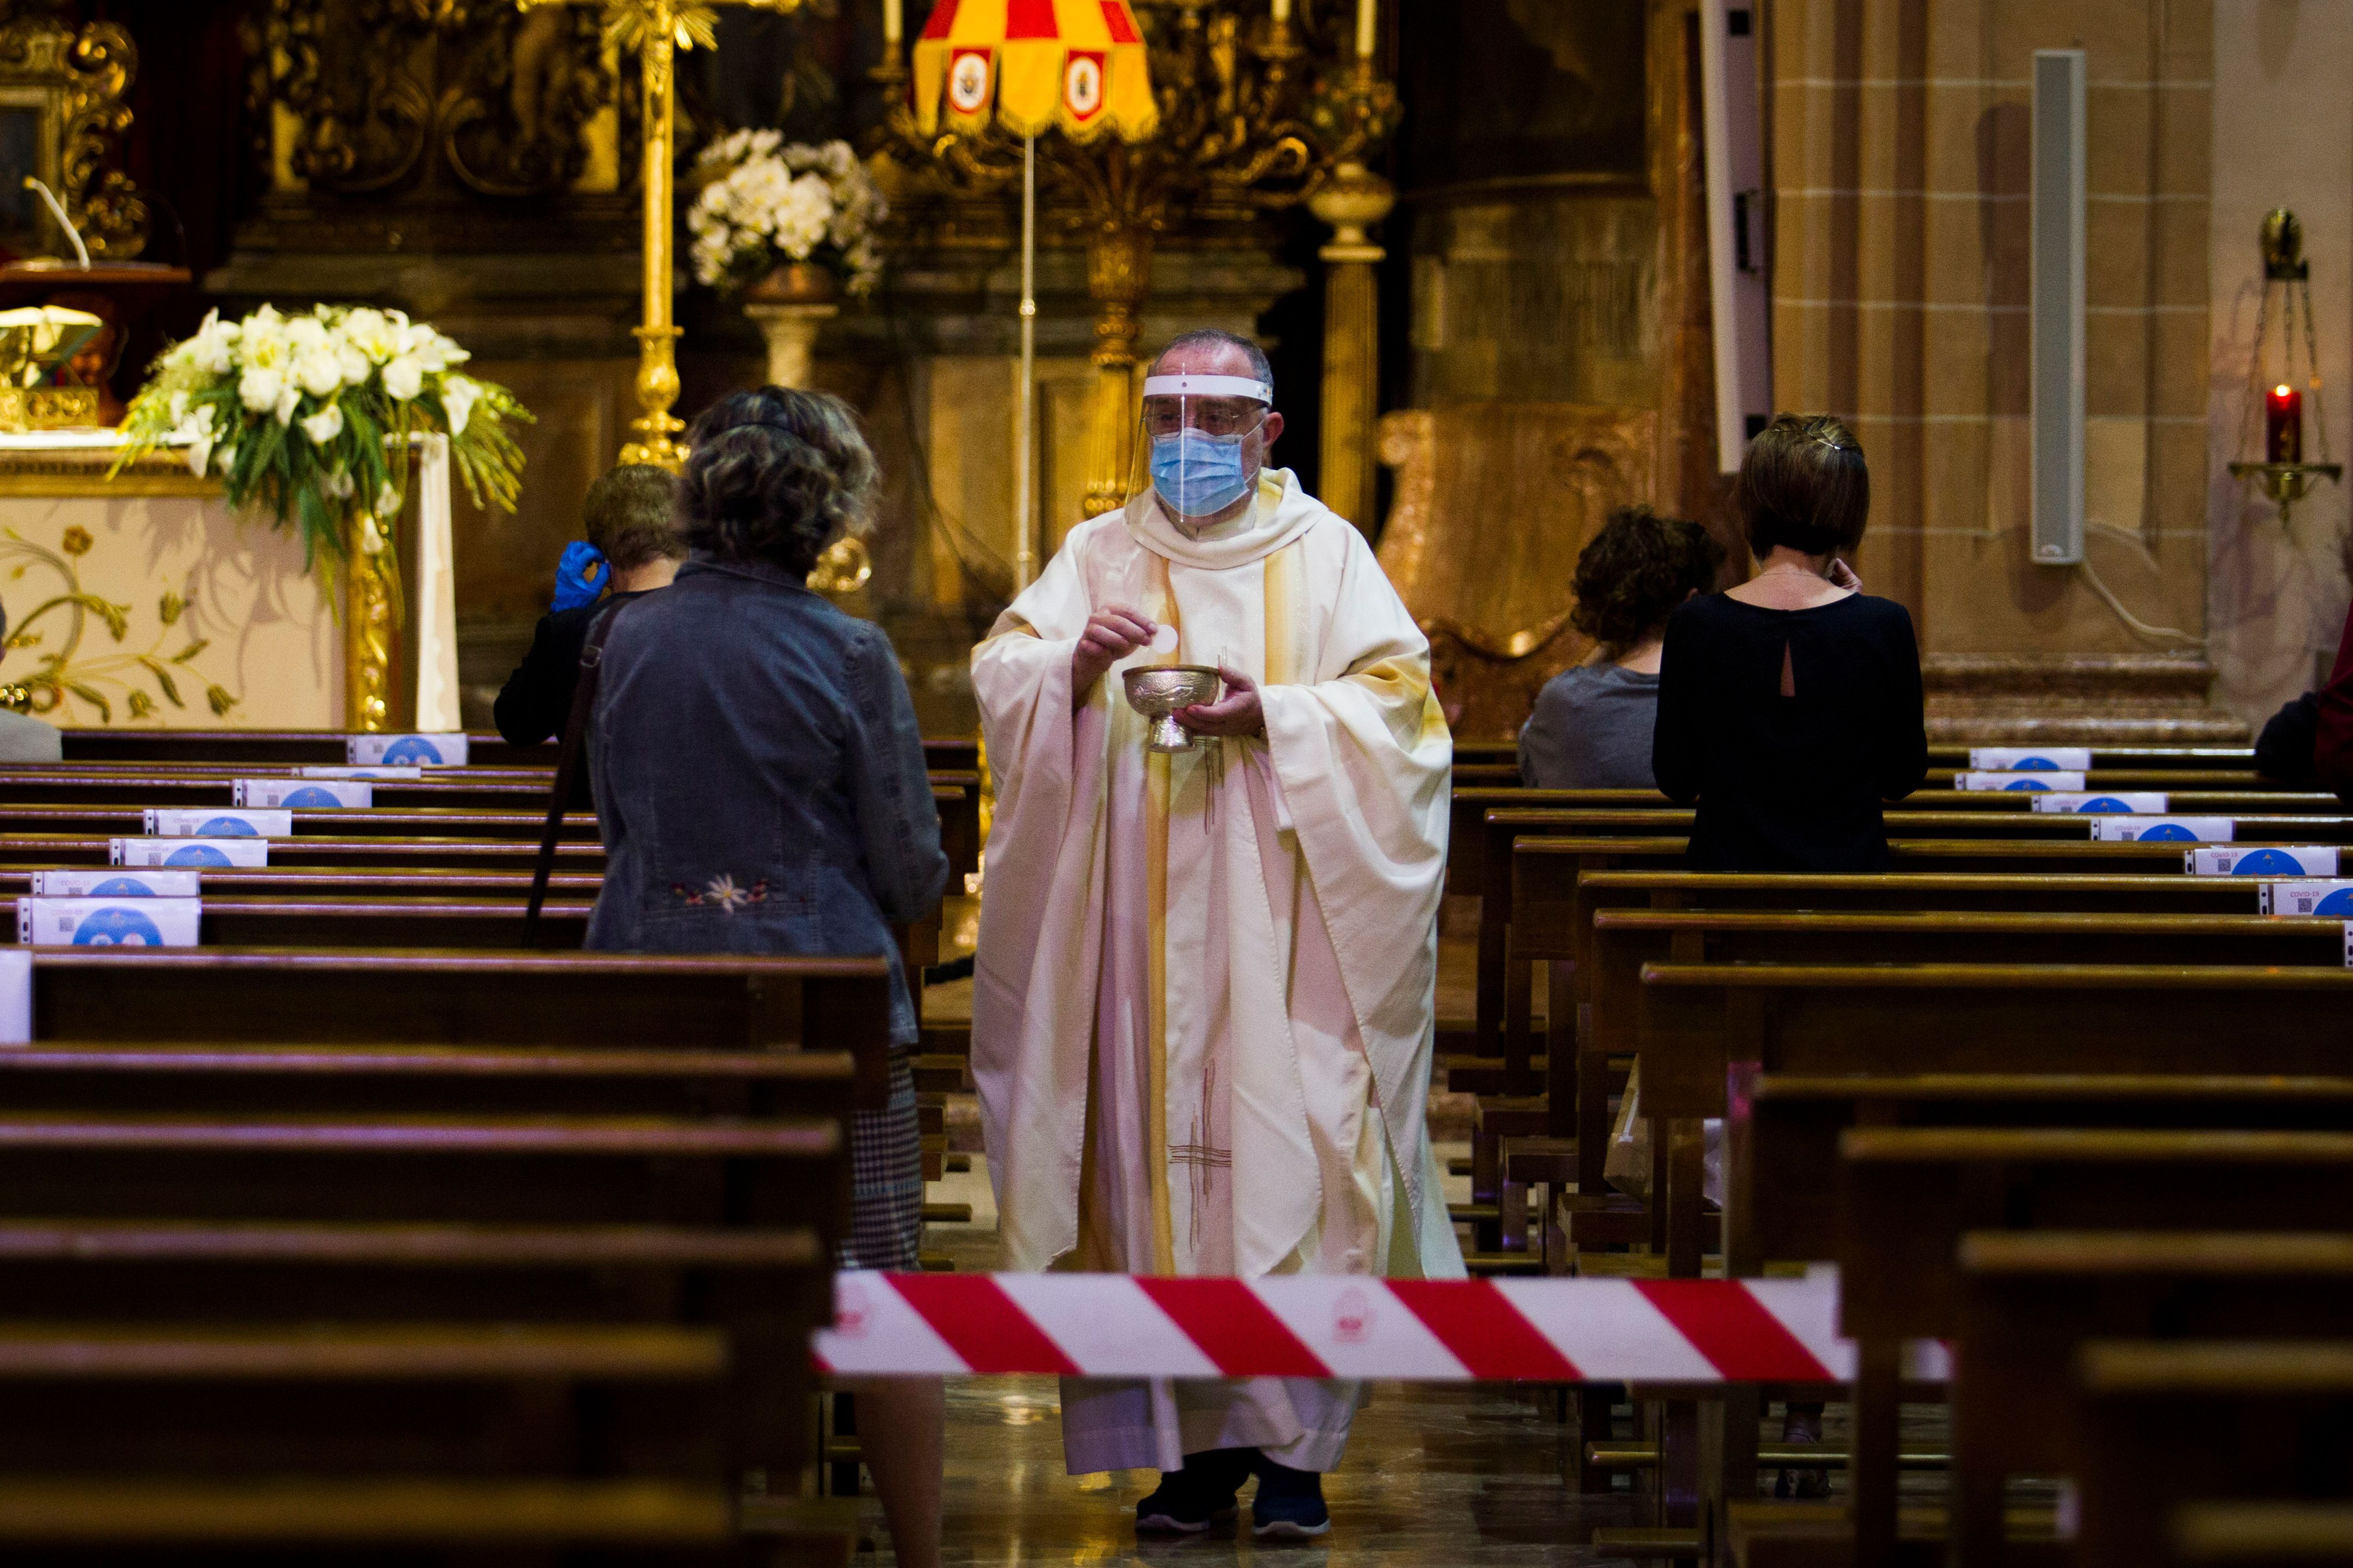 In this image, a priest wearing protective gear anoints the head of a church-goer